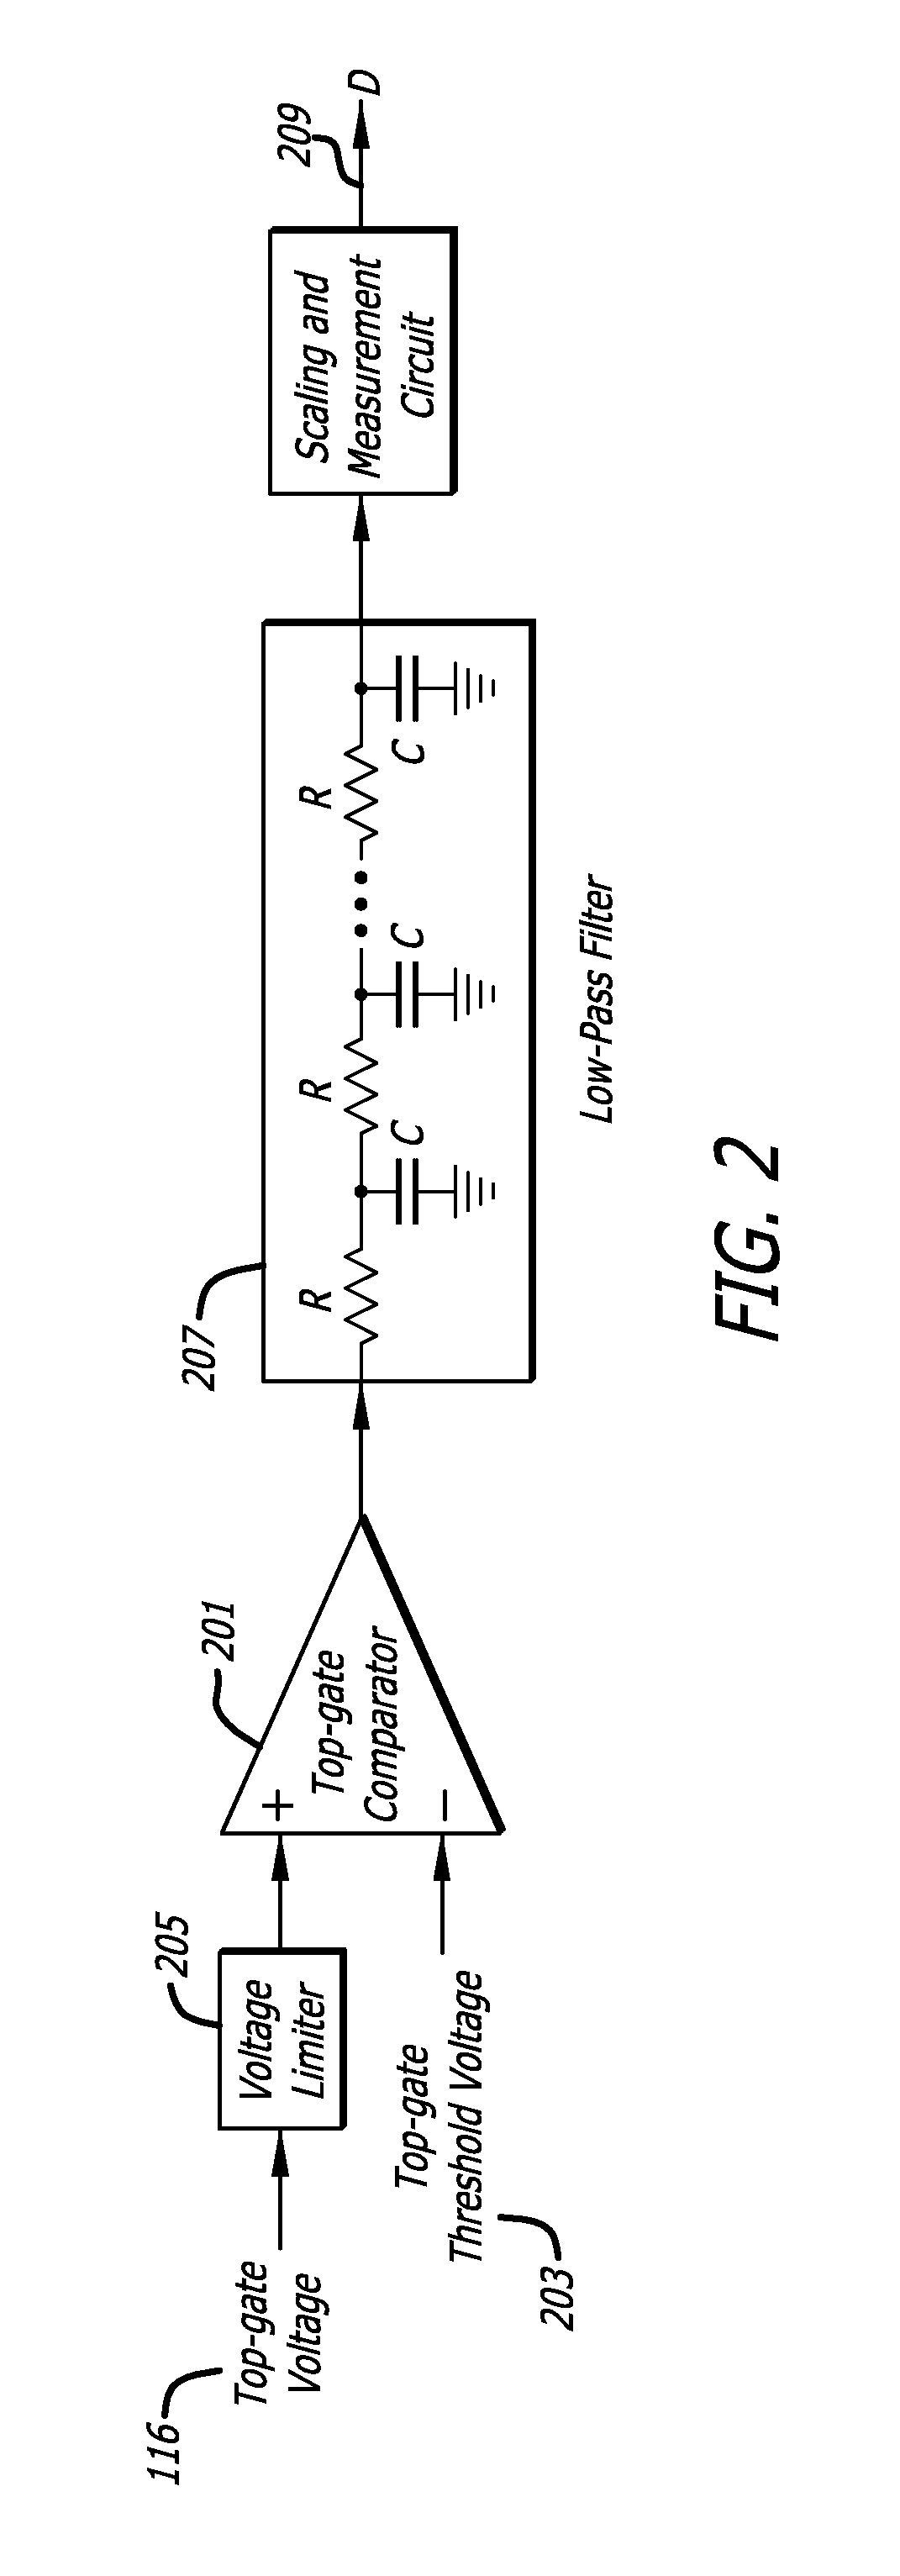 Efficiency measuring circuit for dc-dc converter which calculates internal resistance of switching inductor based on duty cycle